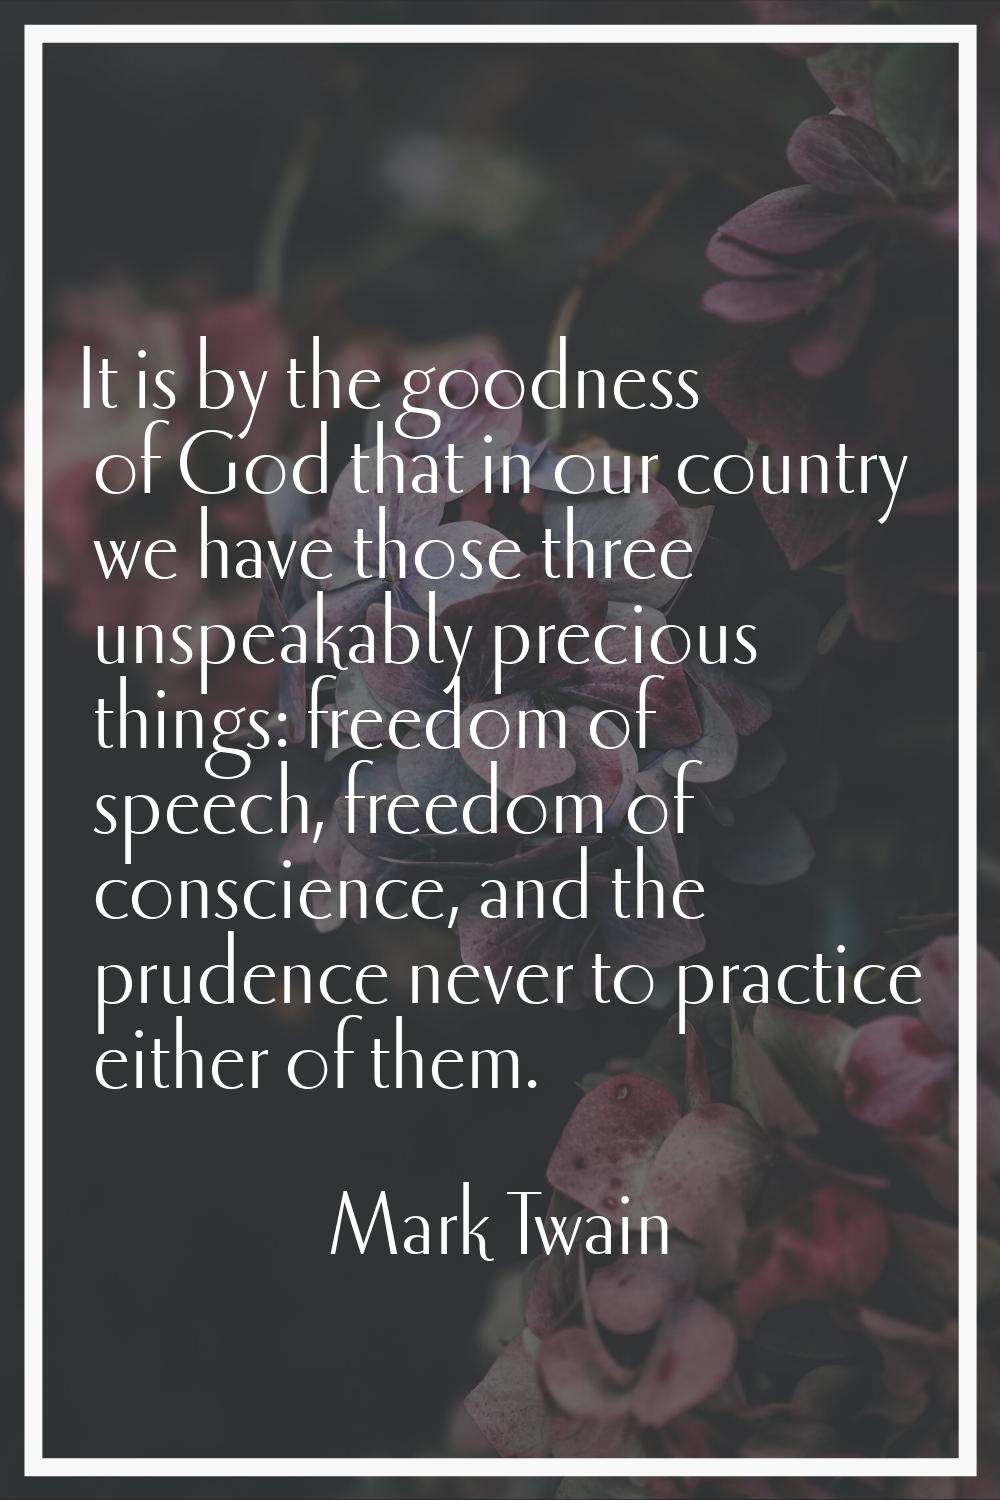 It is by the goodness of God that in our country we have those three unspeakably precious things: f